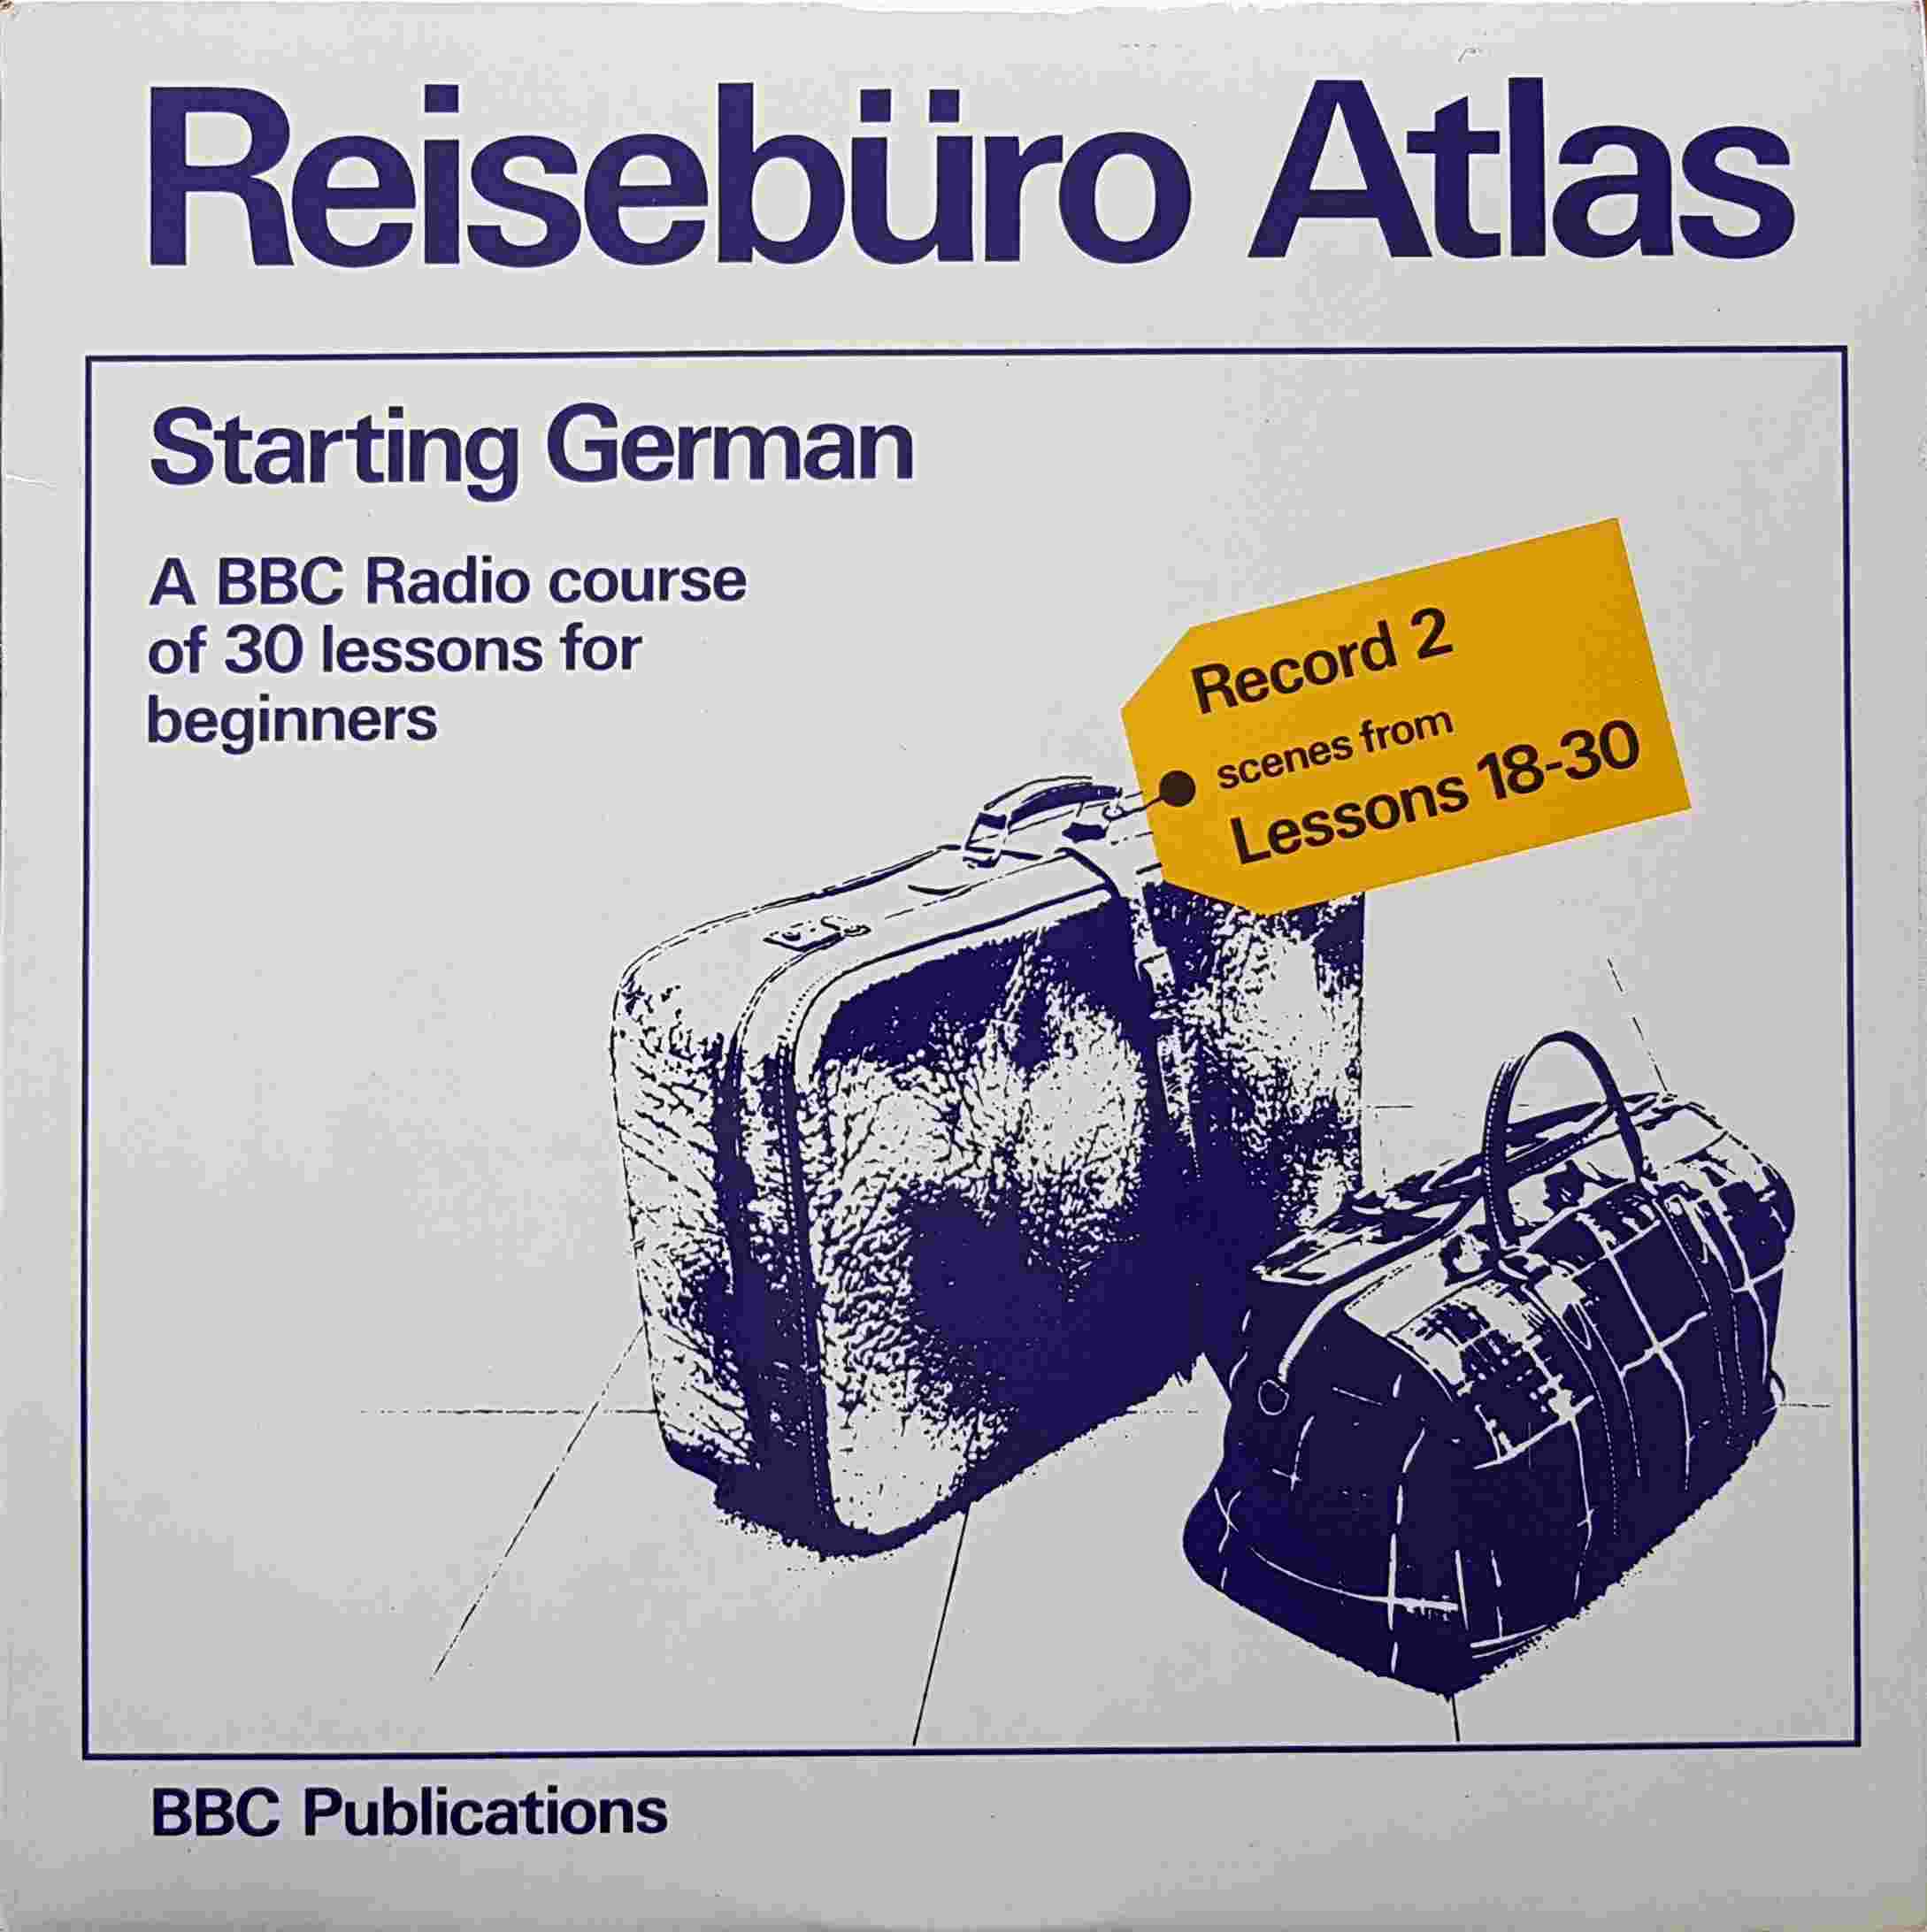 Picture of OP 151/152 Reiseburo Atlas - Starting German - A BBC Radio course of 30 lessons for beginners - Record 2 - Lessons 18 - 30 by artist R. M. Oldnall / Wulf Kunne from the BBC albums - Records and Tapes library